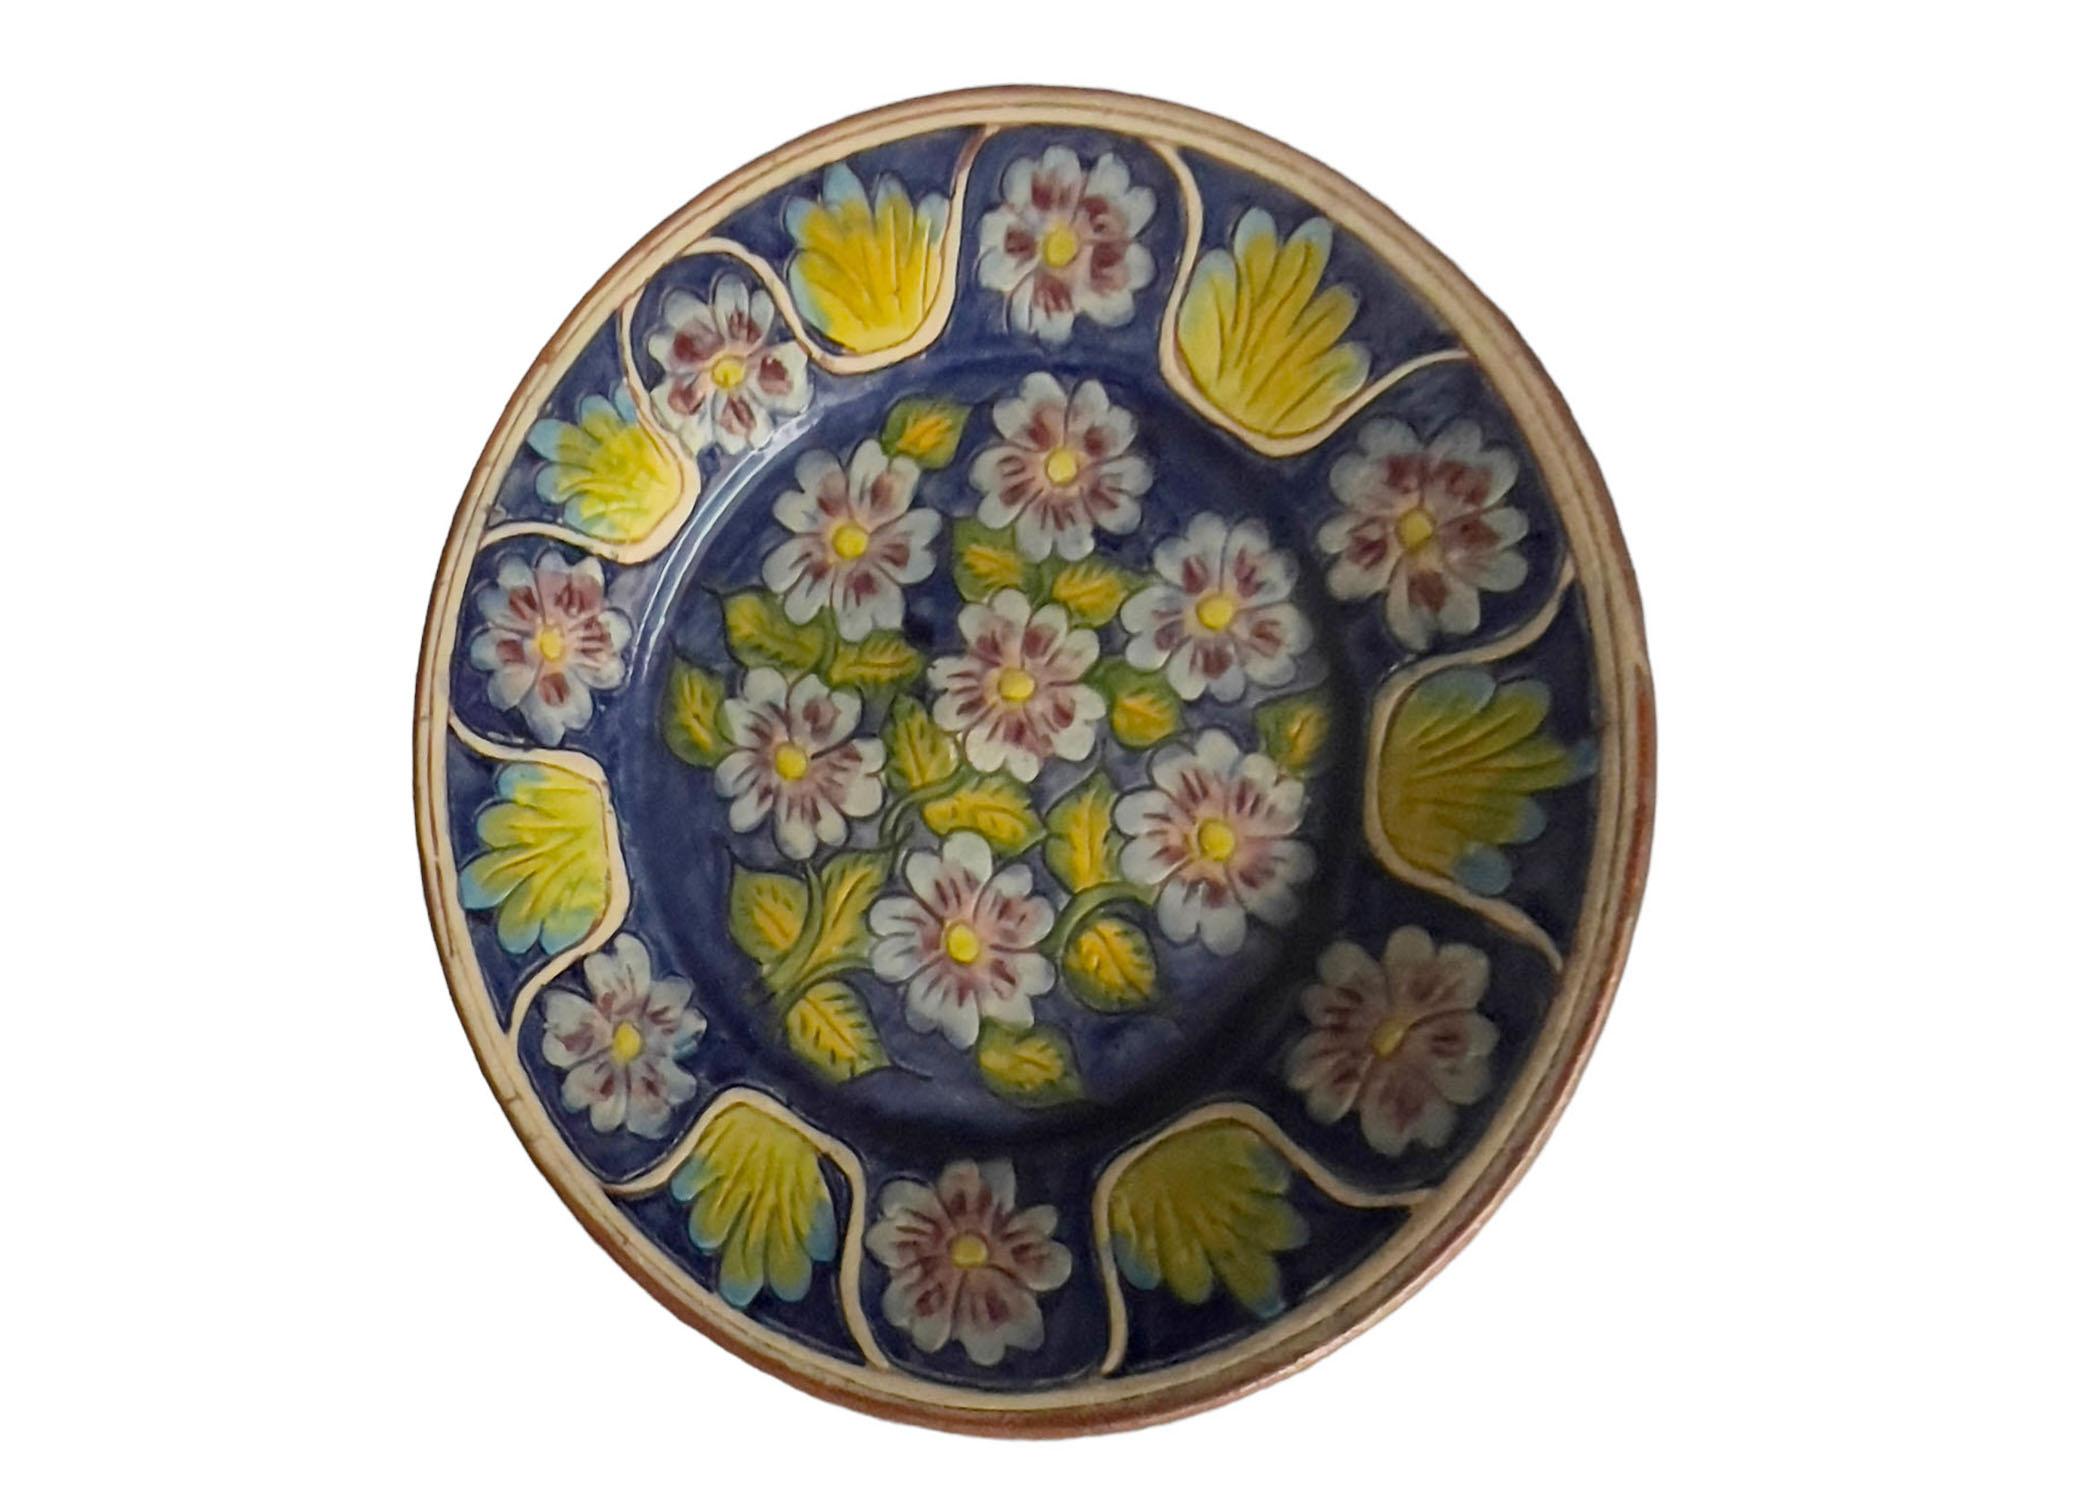 Vintage terracotta plate with a blue and yellow floral design from Spain. Circa 1960s.